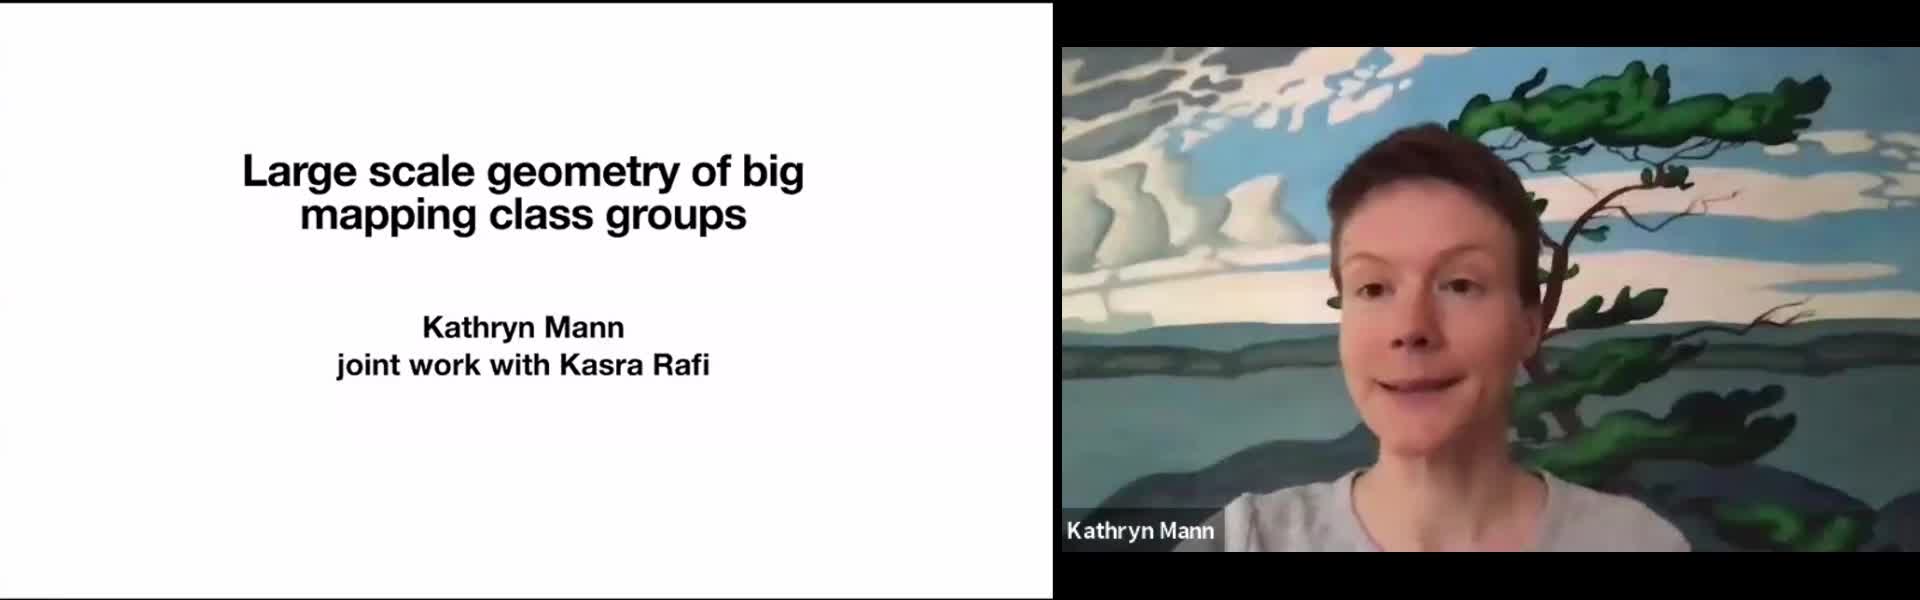 Kathryn Mann: Large-scale geometry of big mapping class groups (RLGTS, 30 June 2020)